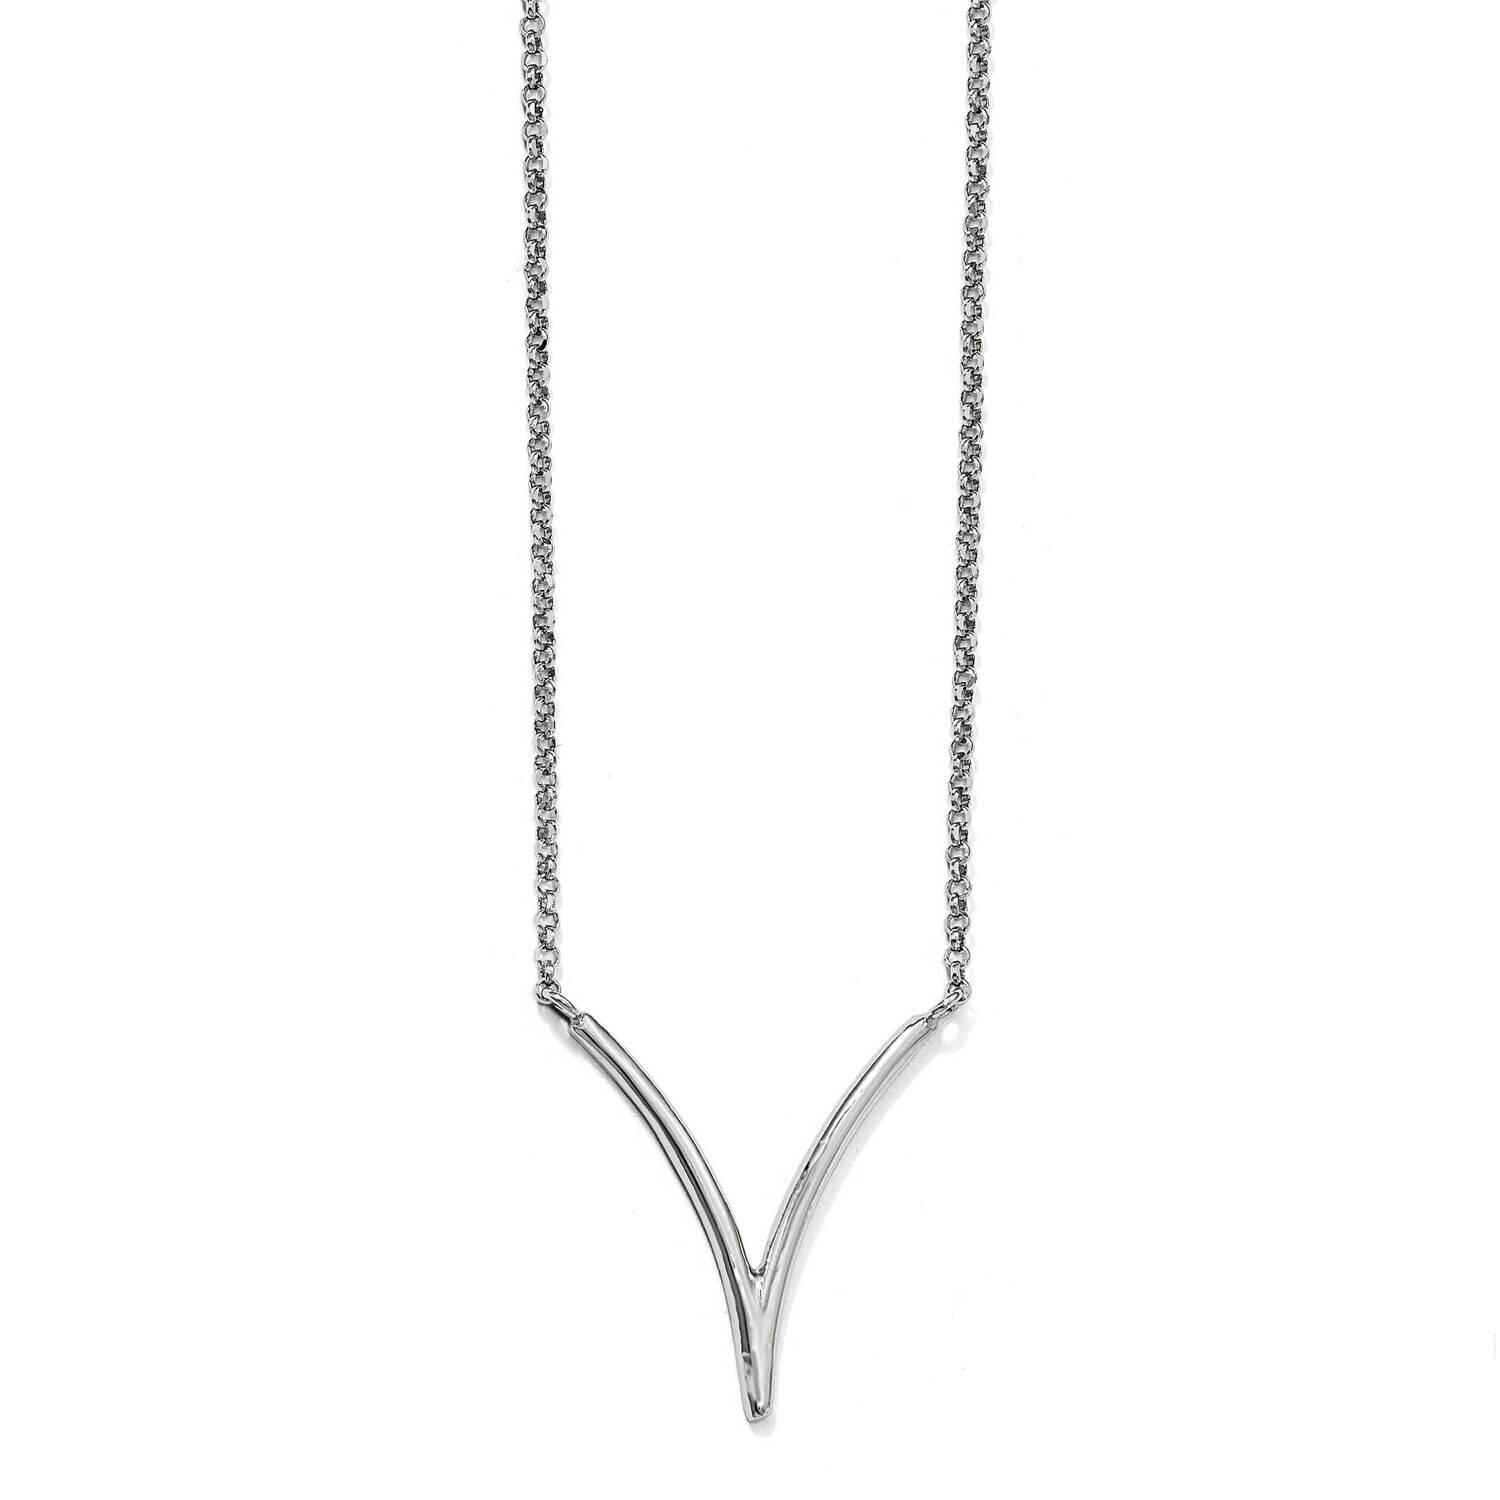 Polished Textured with 2 Inch Extension Necklace Sterling Silver QLF855-17